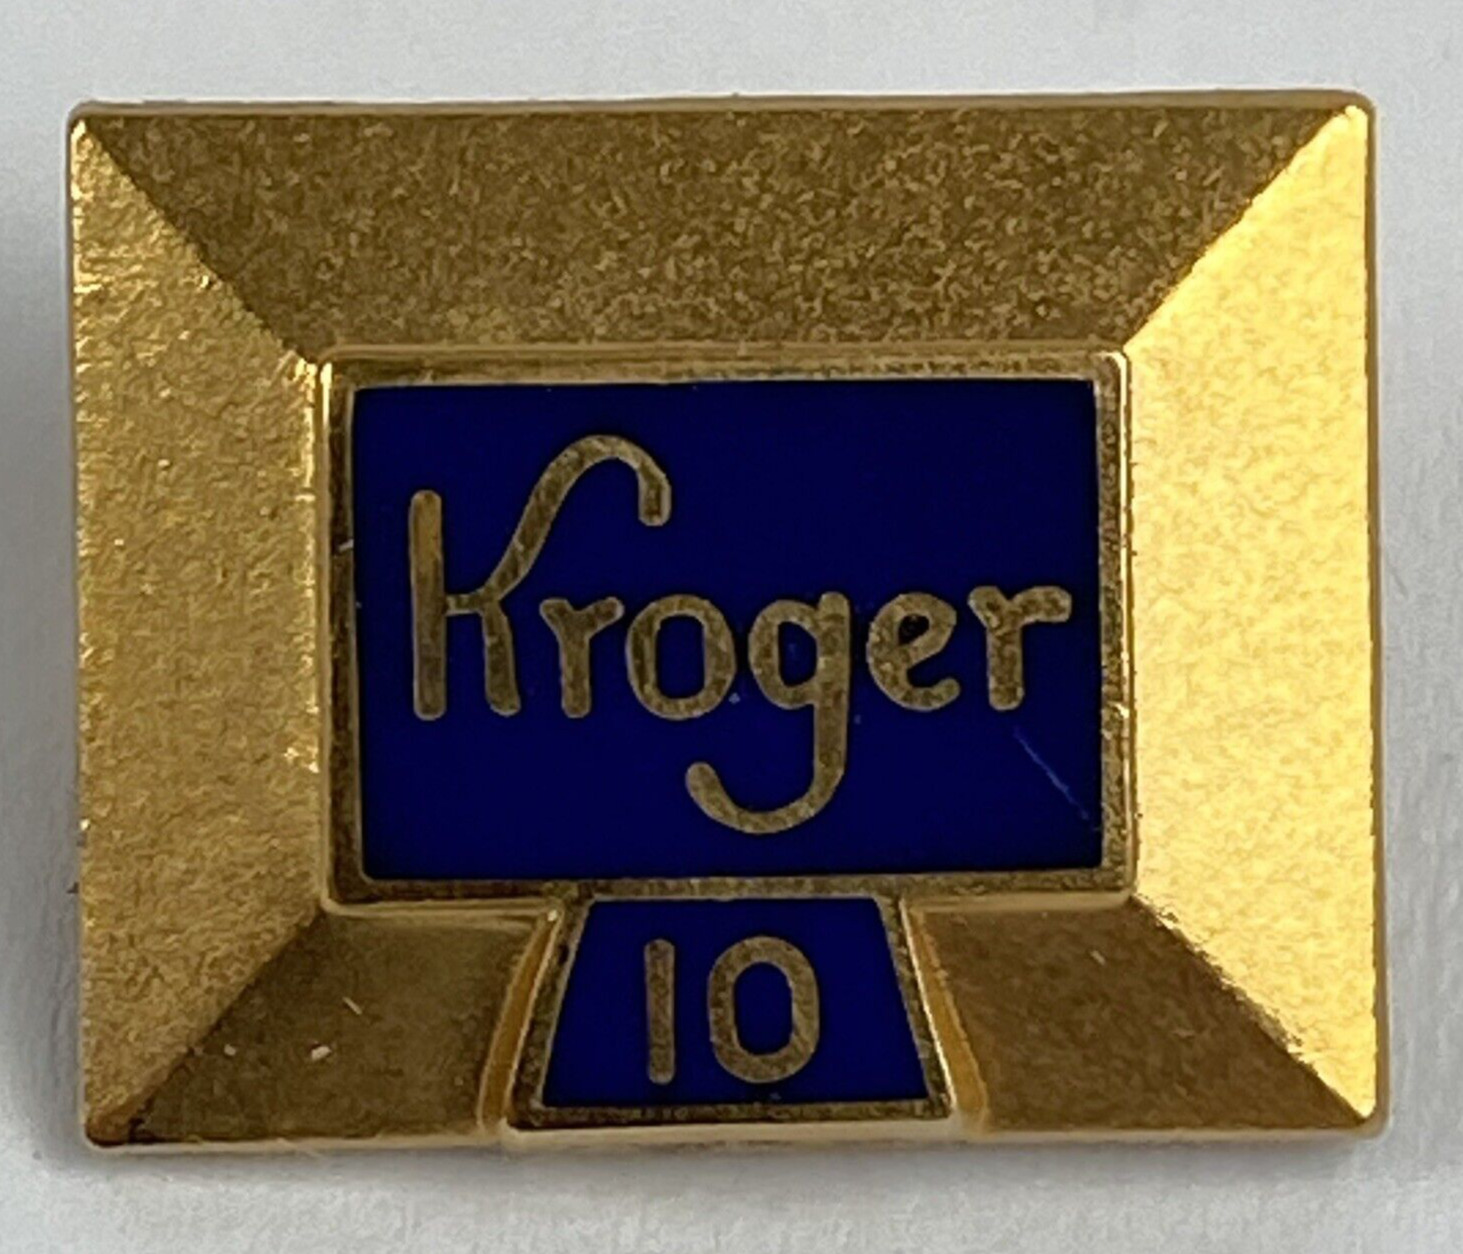 Kroger Grocery Store 10 Year Service Award Pin 1/10 10KGF Gold Filled